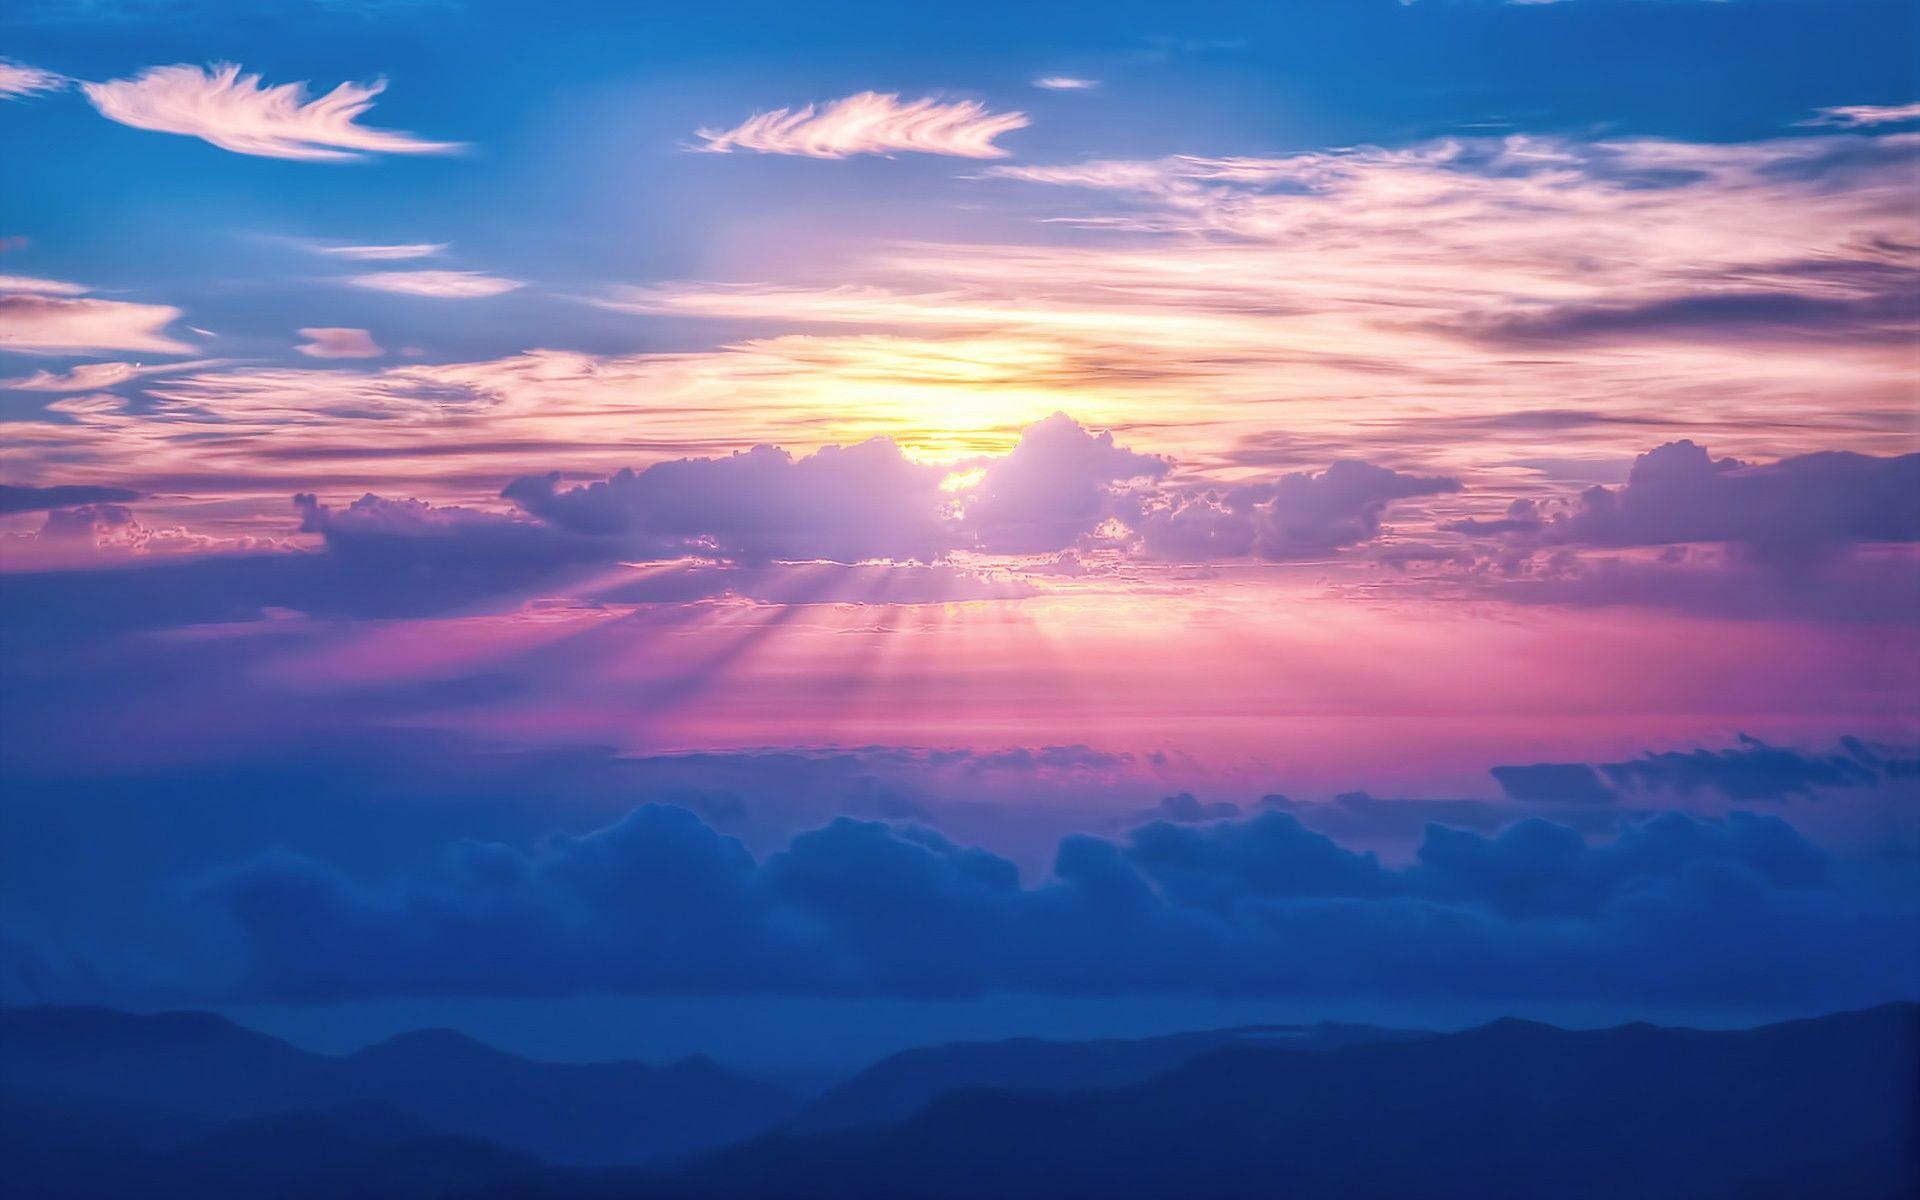 Sunrays Sky Clouds Wallpaper in jpg format for free download